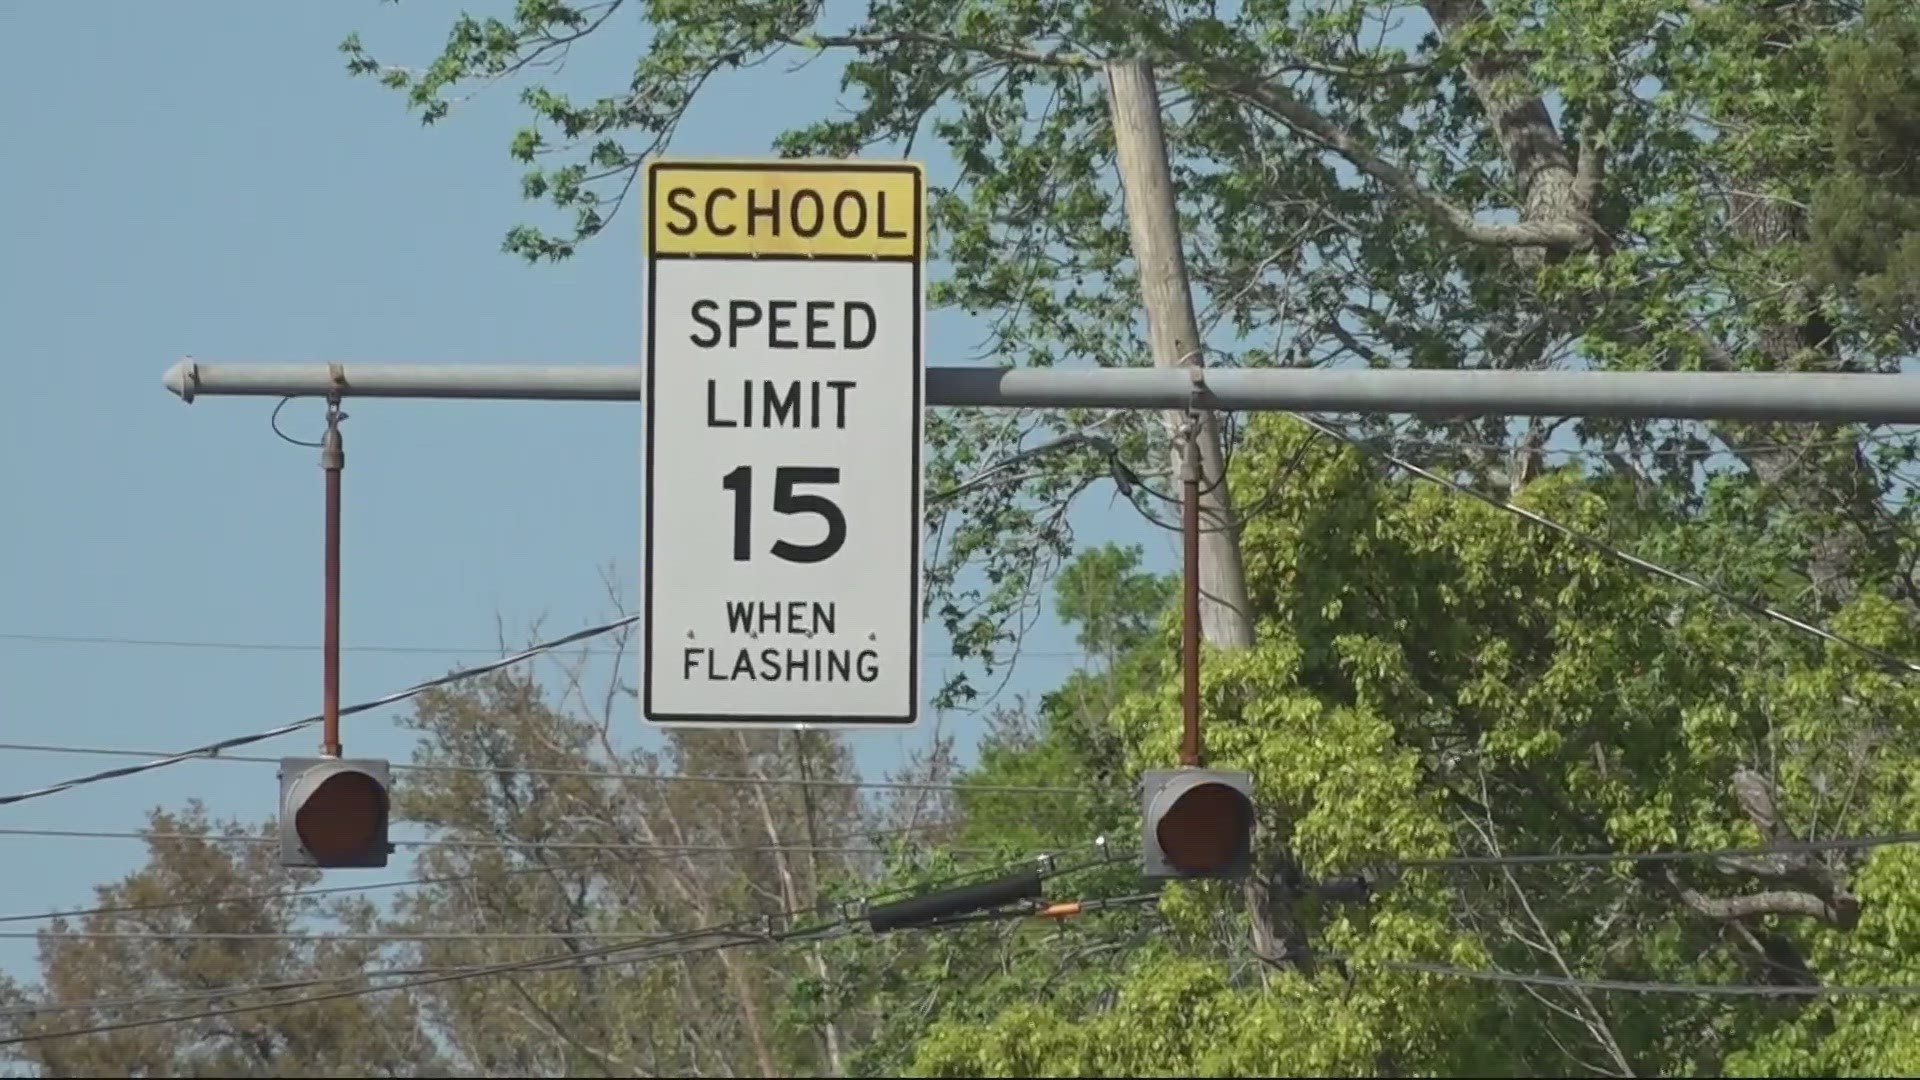 If approved, drivers going at least 10 mph over the speed limit in a school zone would be sent a $100 fine through the mail.